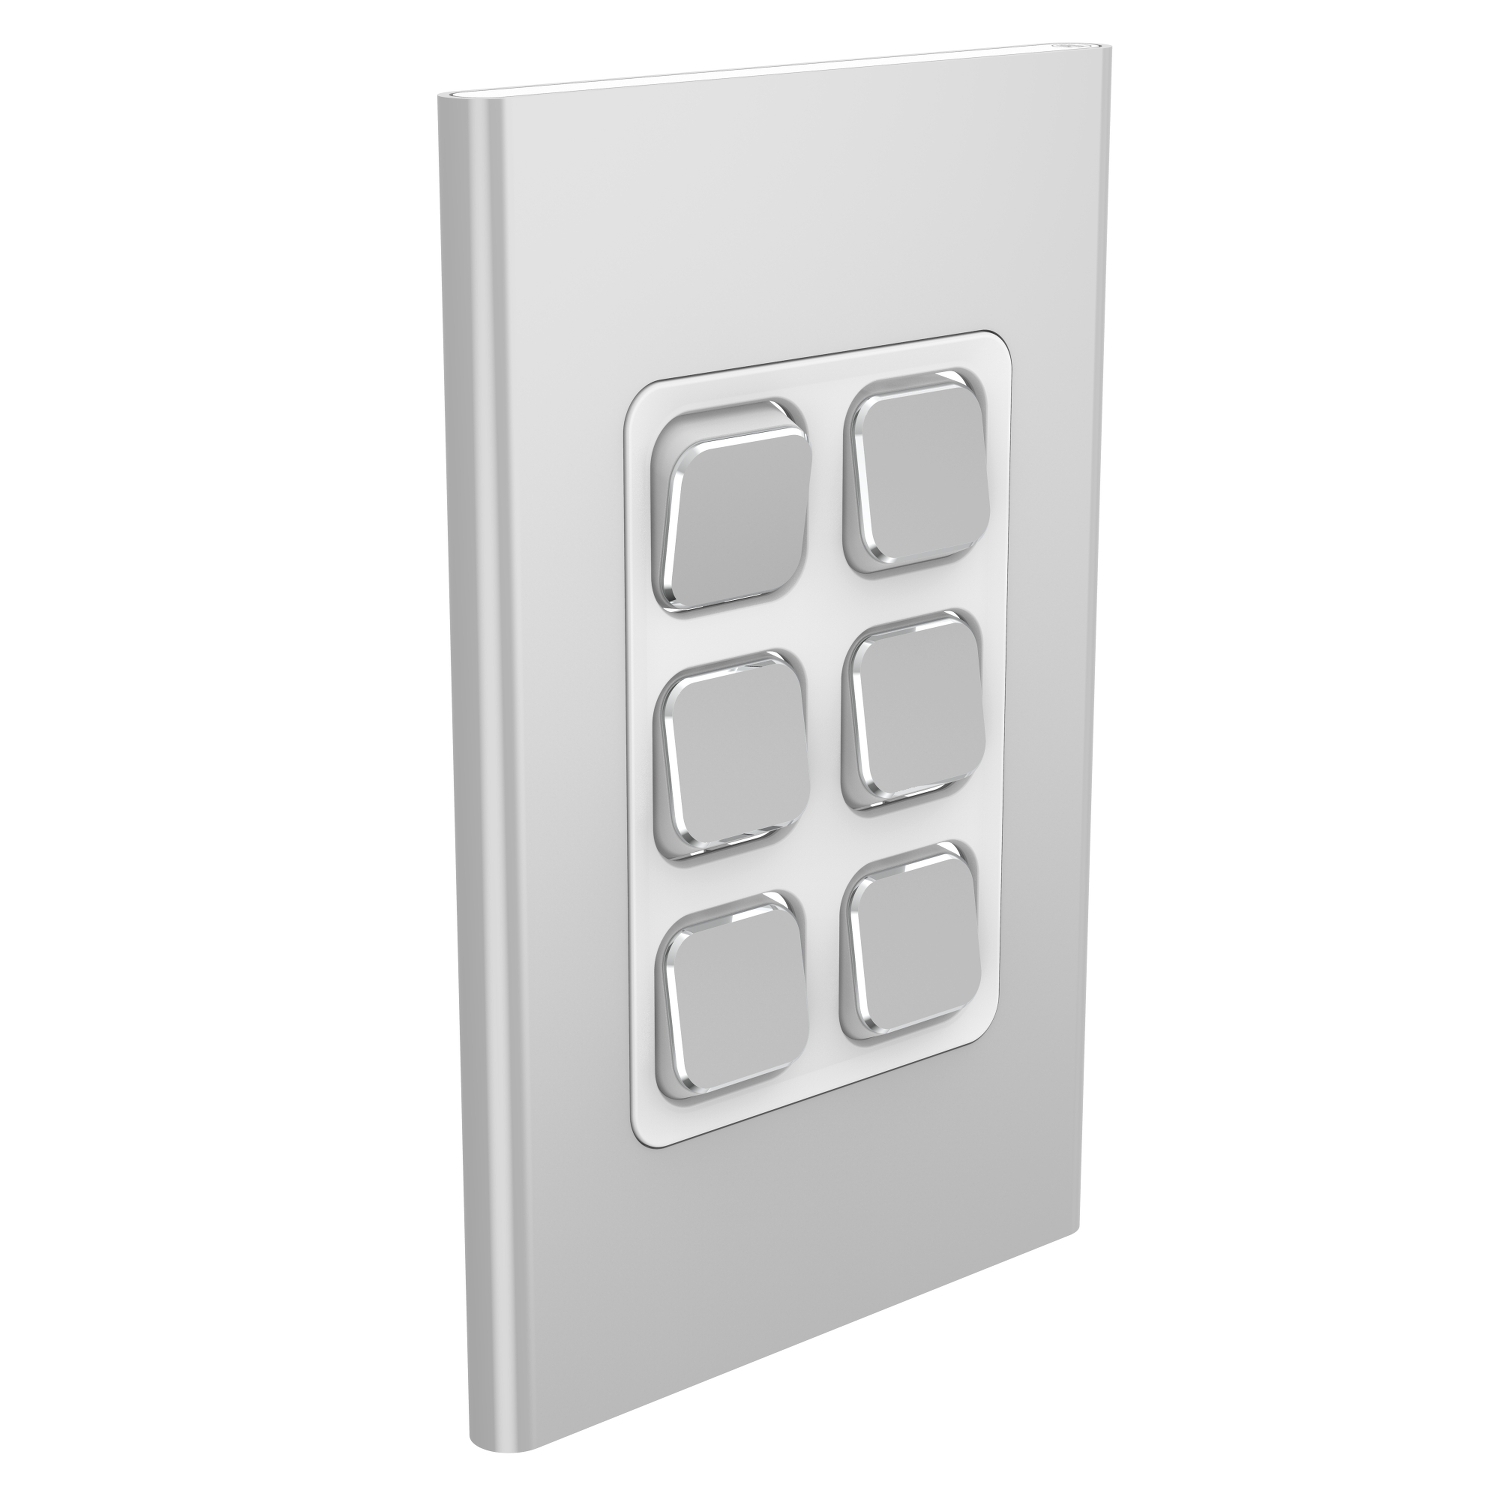 PDL Iconic Styl, cover frame, 6 switches, vertical - Silver